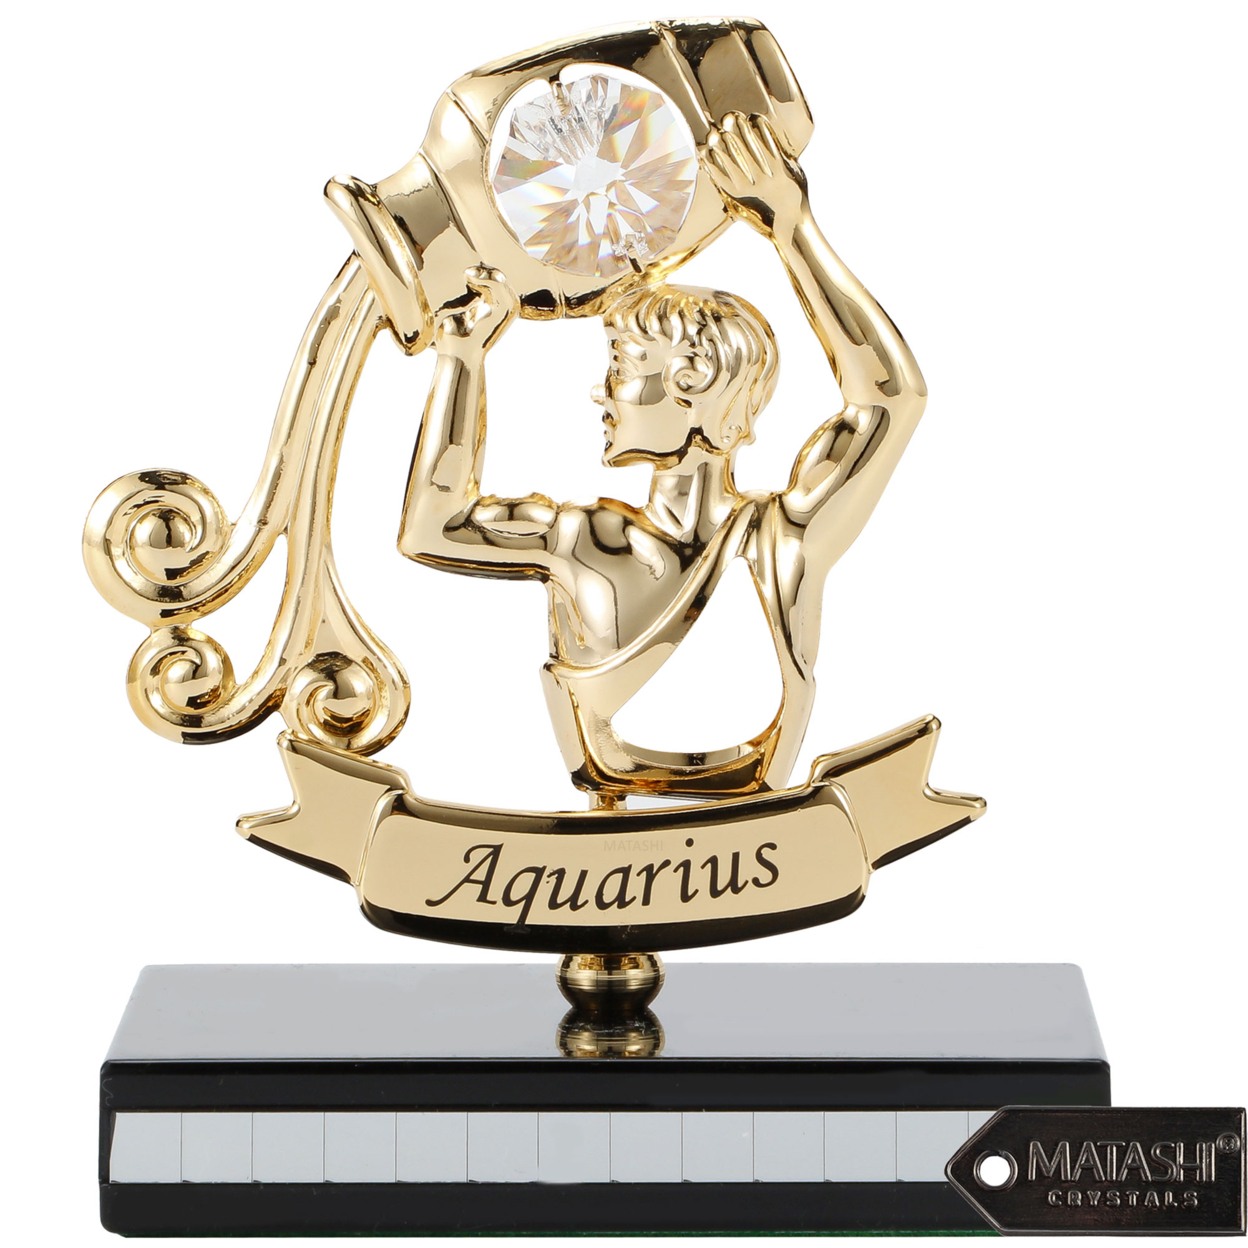 Matashi 24K Gold Plated Zodiac Astrological Sign Aquarius Figurine Statuette On Stand Studded With Crystals Gift For Mom Girlfriend Wife Dad